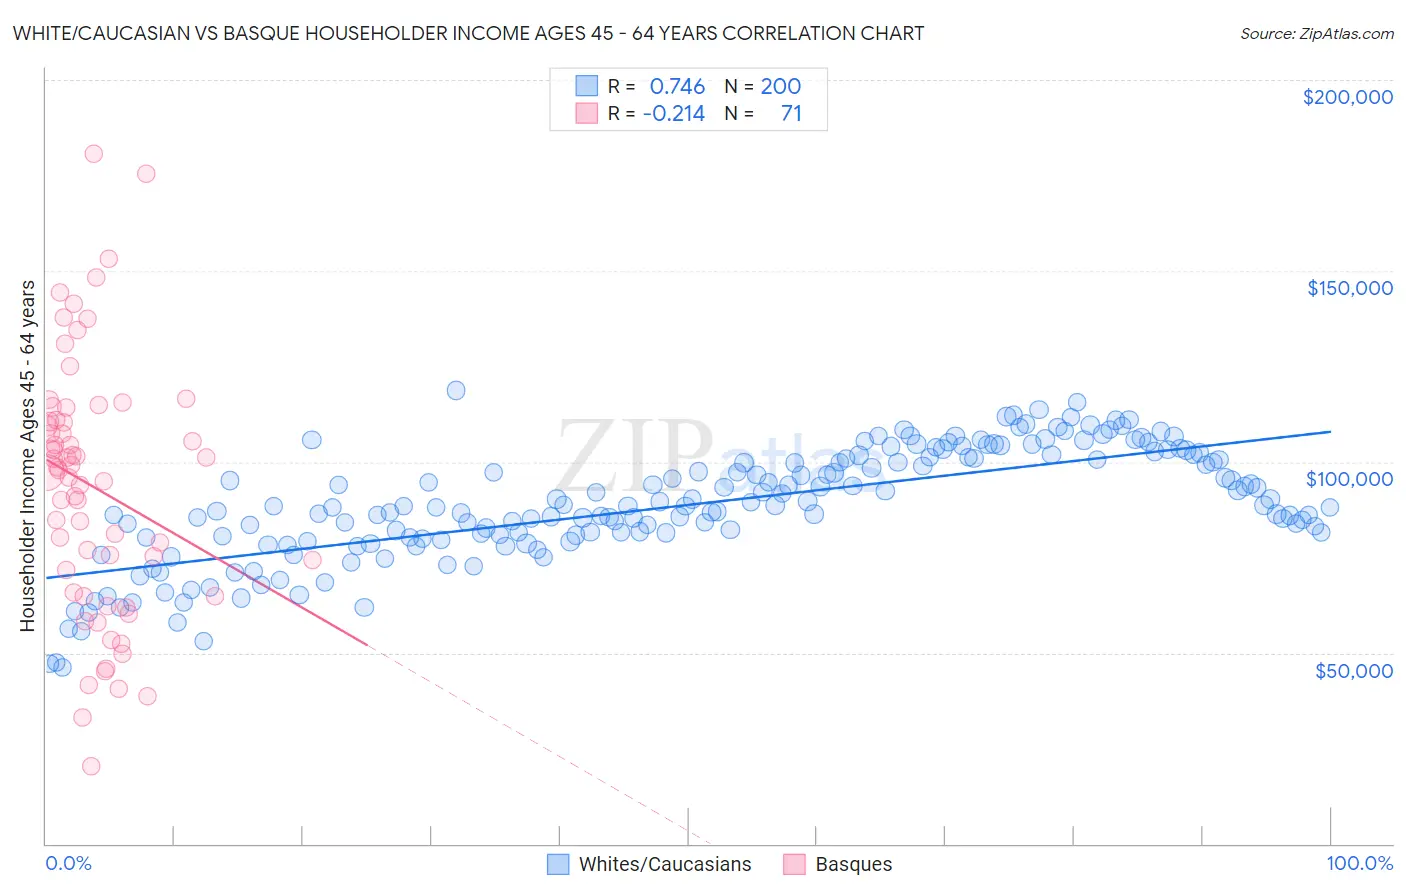 White/Caucasian vs Basque Householder Income Ages 45 - 64 years